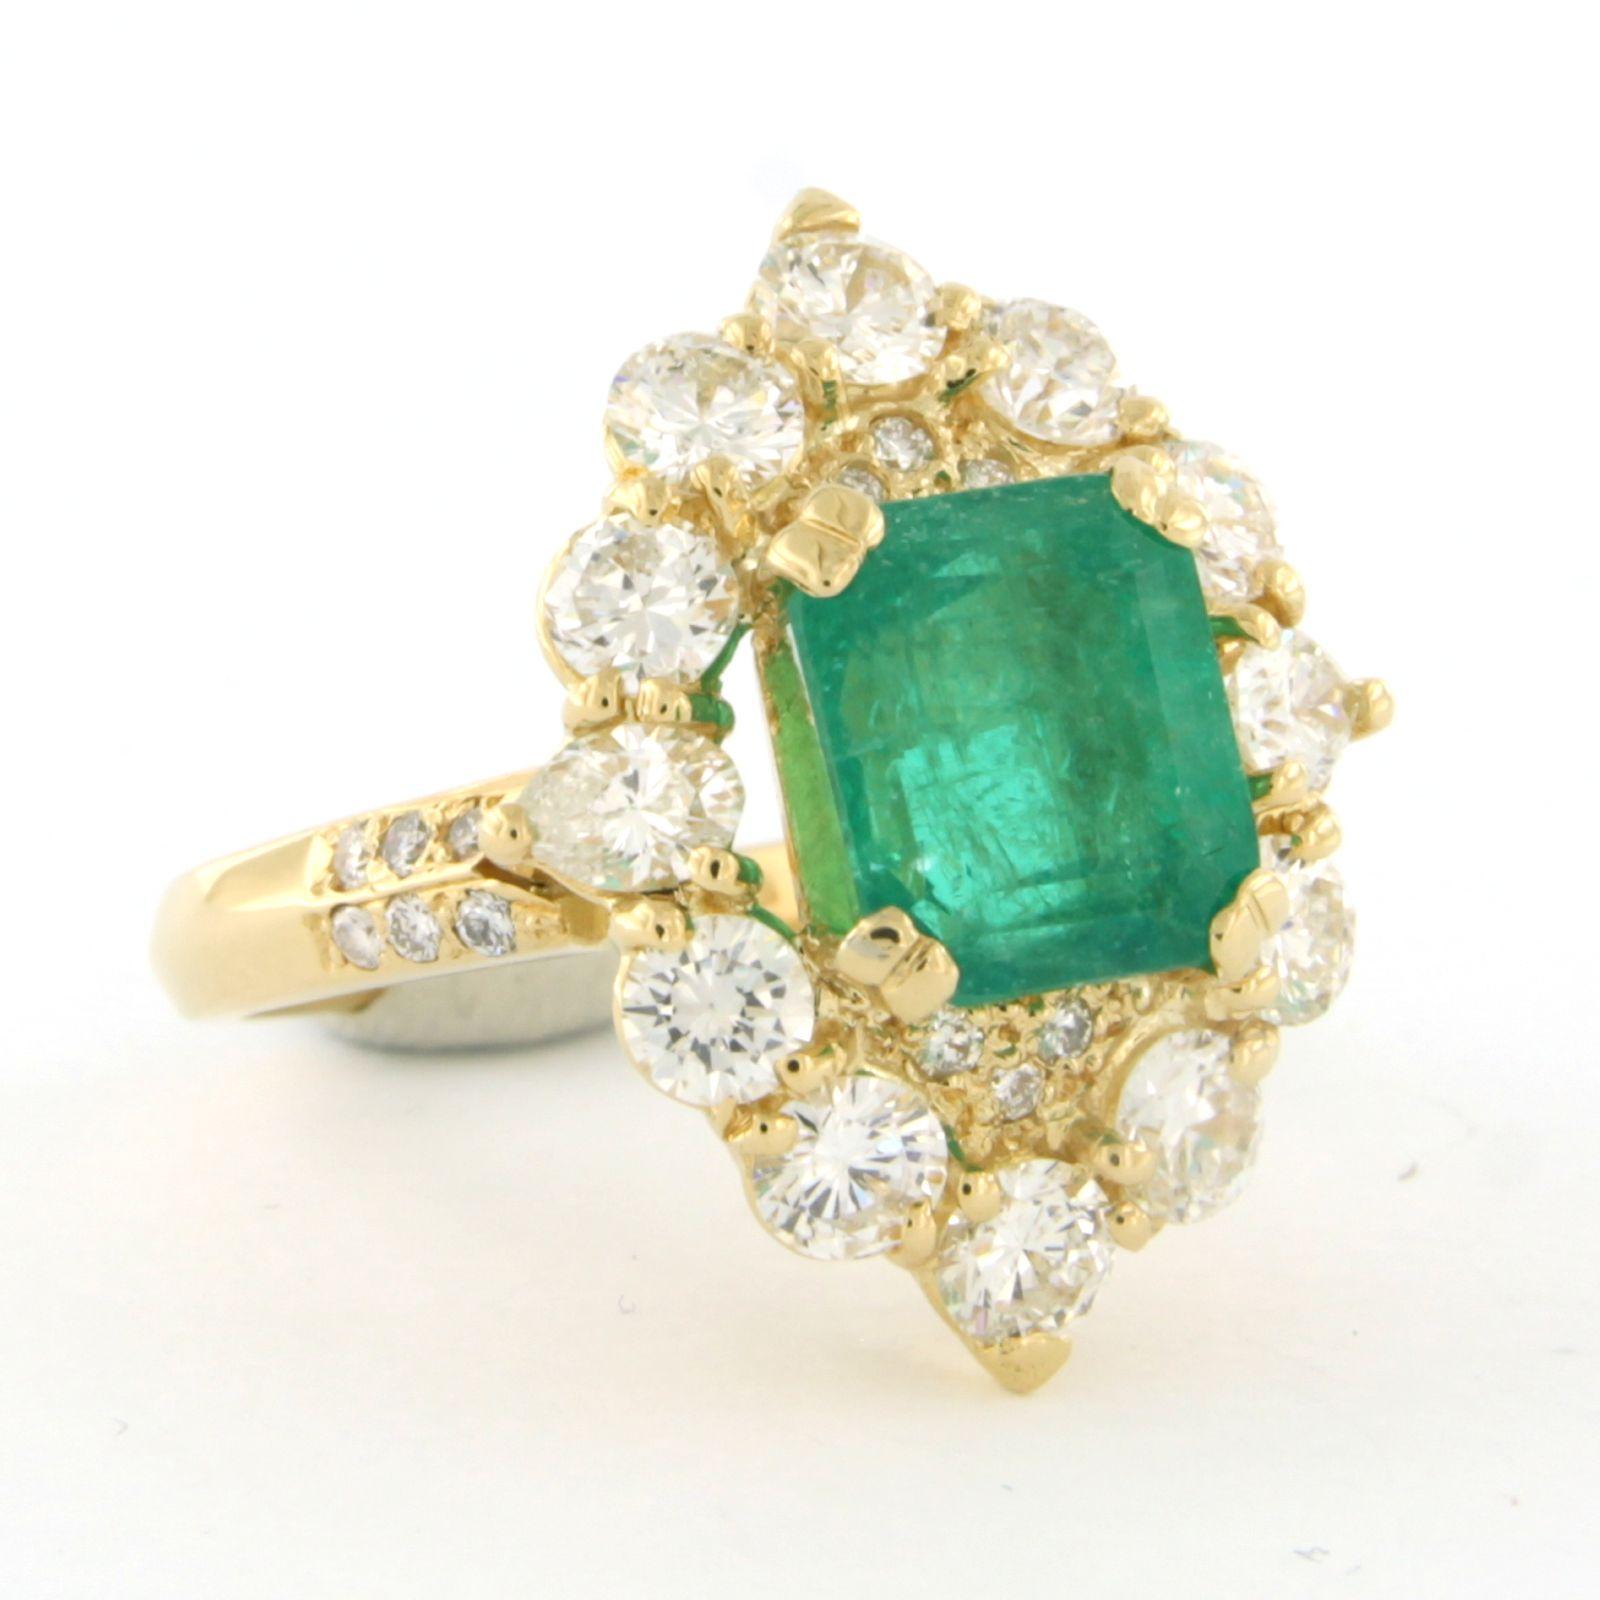 Modern Ring with emerald up to 3.30ct and diamonds up to 2.50ct. 18k yellow gold